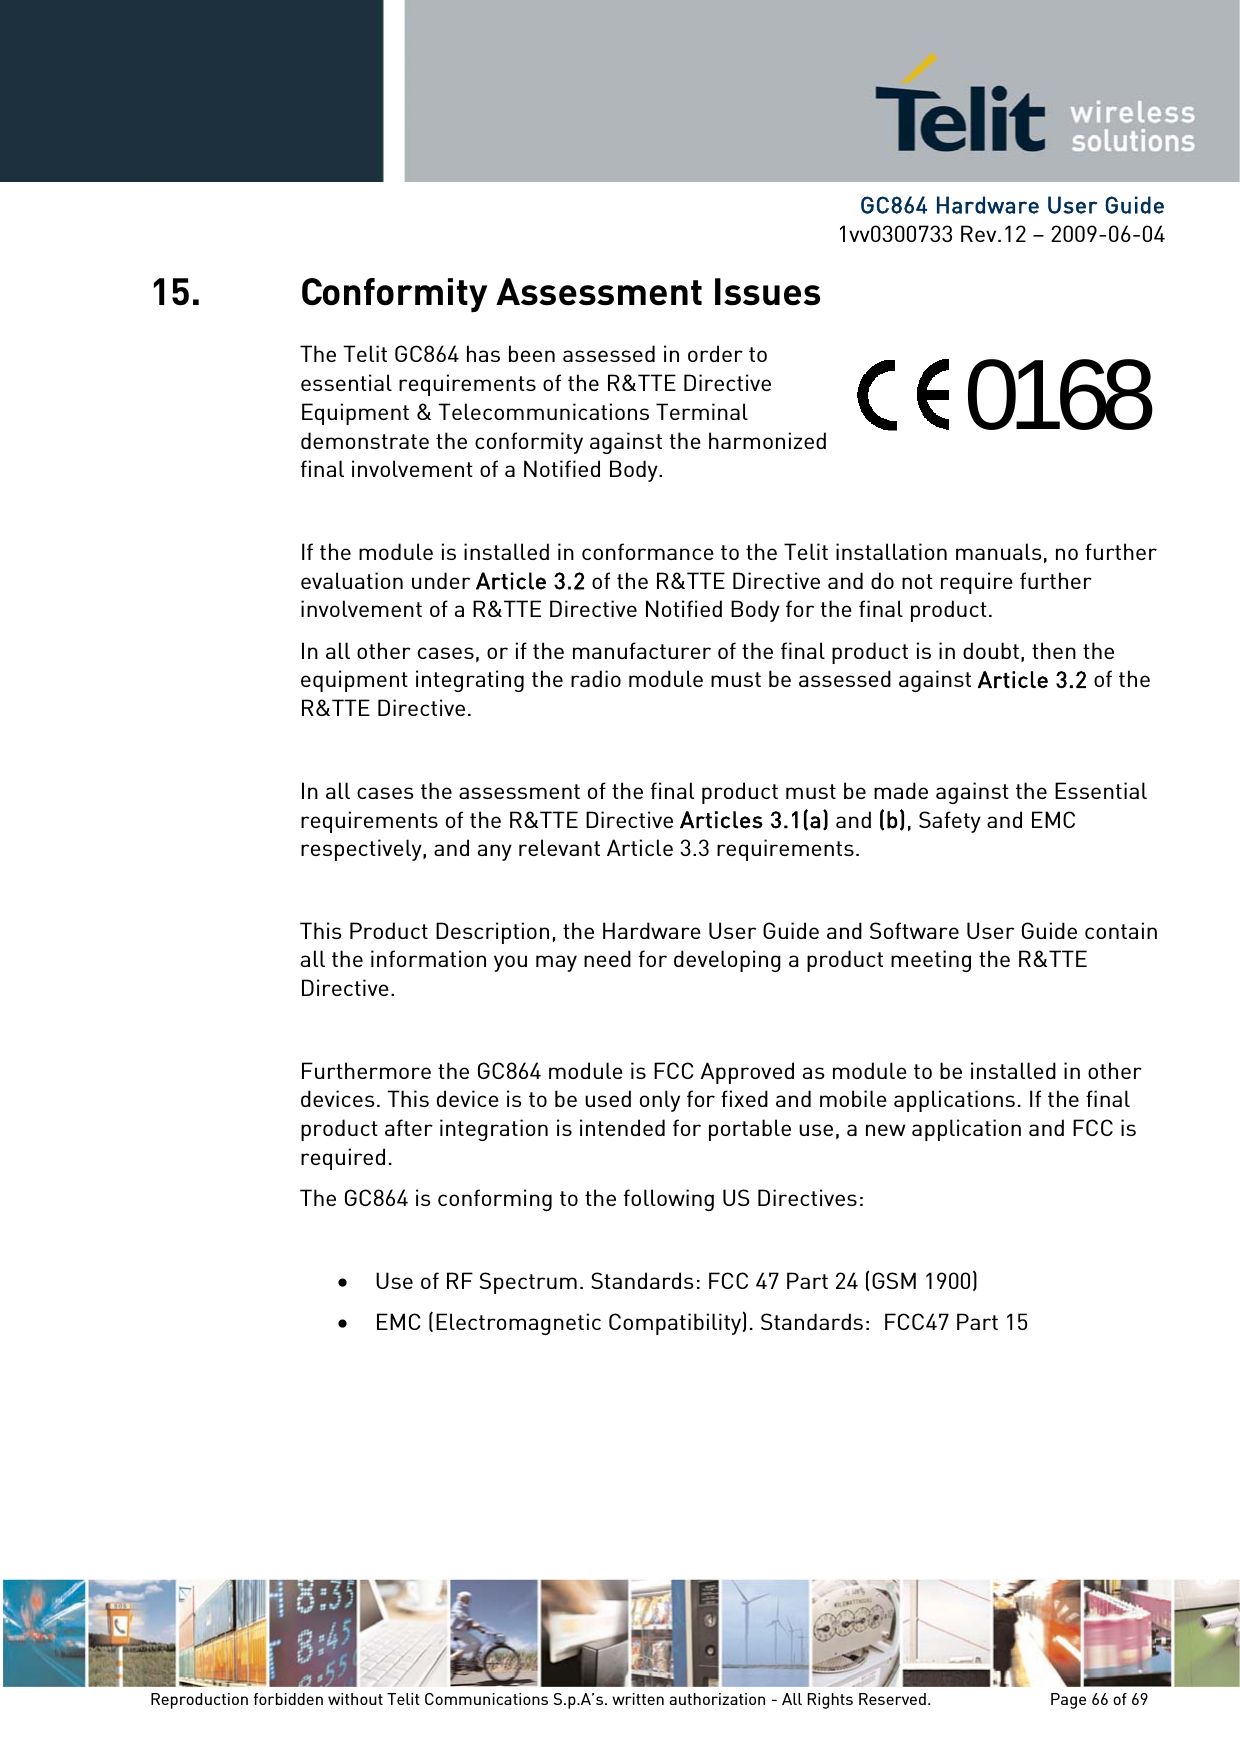      GC864 Hardware User Guide 1vv0300733 Rev.12 – 2009-06-04 15. Conformity Assessment Issues The Telit GC864 has been assessed in order to  satisfy the essential requirements of the R&amp;TTE Directive  1999/05/EC (Radio Equipment &amp; Telecommunications Terminal  Equipments) to demonstrate the conformity against the harmonized  standards with the final involvement of a Notified Body.  If the module is installed in conformance to the Telit installation manuals, no further evaluation under Article 3.2 of the R&amp;TTE Directive and do not require further involvement of a R&amp;TTE Directive Notified Body for the final product. In all other cases, or if the manufacturer of the final product is in doubt, then the equipment integrating the radio module must be assessed against Article 3.2 of the R&amp;TTE Directive.  In all cases the assessment of the final product must be made against the Essential requirements of the R&amp;TTE Directive Articles 3.1(a) and (b), Safety and EMC respectively, and any relevant Article 3.3 requirements.  This Product Description, the Hardware User Guide and Software User Guide contain all the information you may need for developing a product meeting the R&amp;TTE Directive.  Furthermore the GC864 module is FCC Approved as module to be installed in other devices. This device is to be used only for fixed and mobile applications. If the final product after integration is intended for portable use, a new application and FCC is required. The GC864 is conforming to the following US Directives:  • Use of RF Spectrum. Standards: FCC 47 Part 24 (GSM 1900) • EMC (Electromagnetic Compatibility). Standards:  FCC47 Part 15     0168 Reproduction forbidden without Telit Communications S.p.A’s. written authorization - All Rights Reserved.    Page 66 of 69  